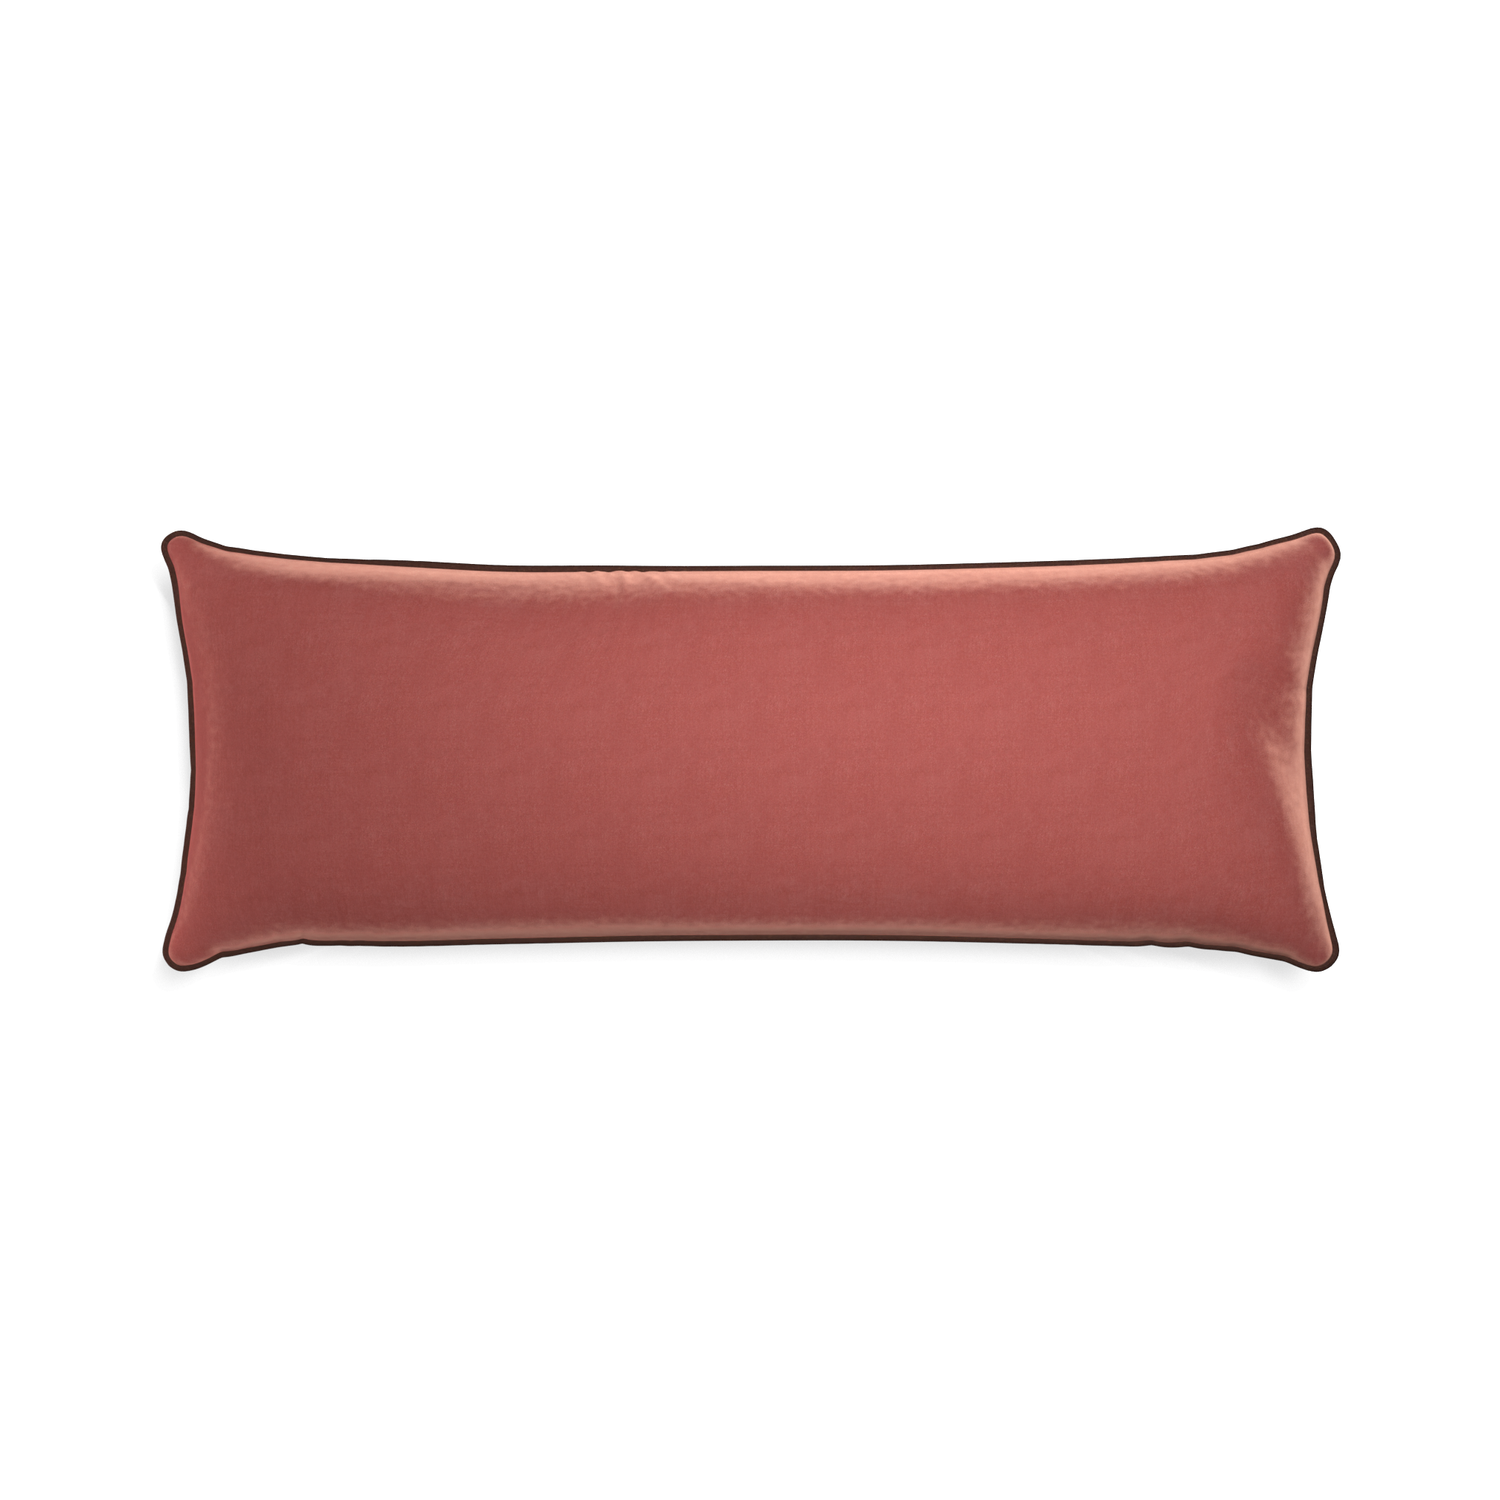 Xl-lumbar cosmo velvet custom coralpillow with w piping on white background